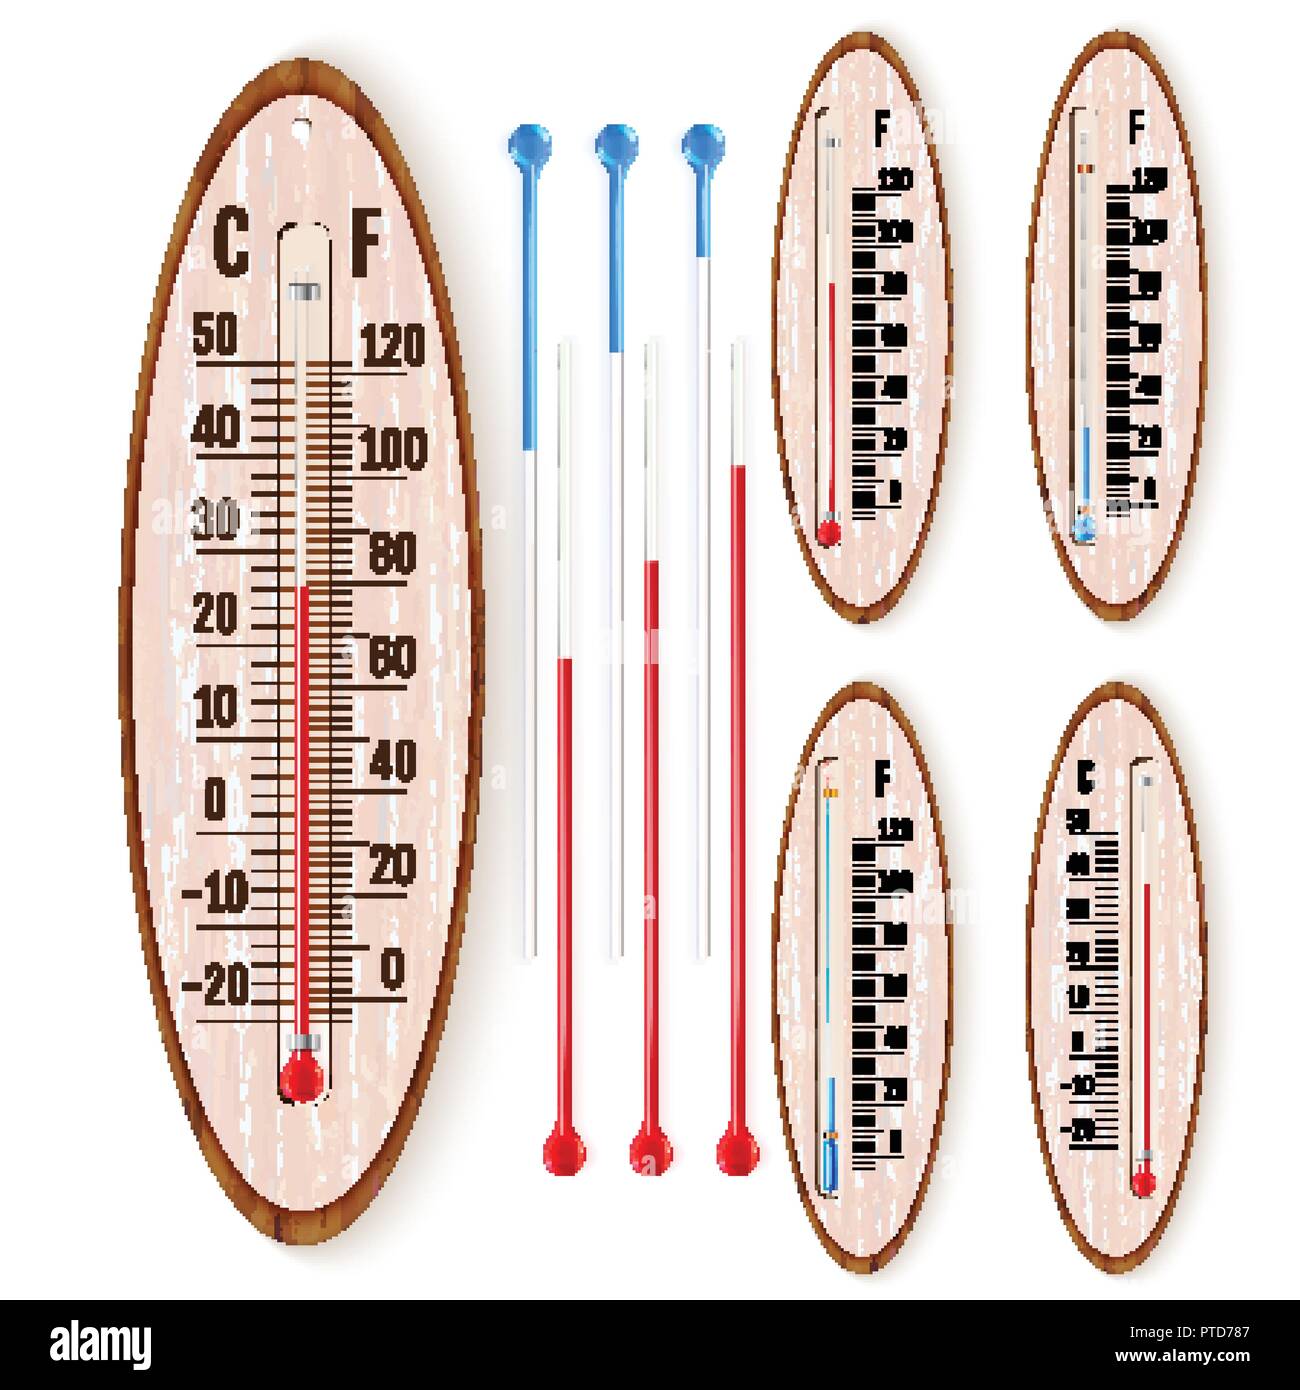 https://c8.alamy.com/comp/PTD787/vector-set-of-realistic-liquid-thermometers-with-celsius-and-fahrenheit-scales-red-and-blue-indicator-vector-illustration-PTD787.jpg